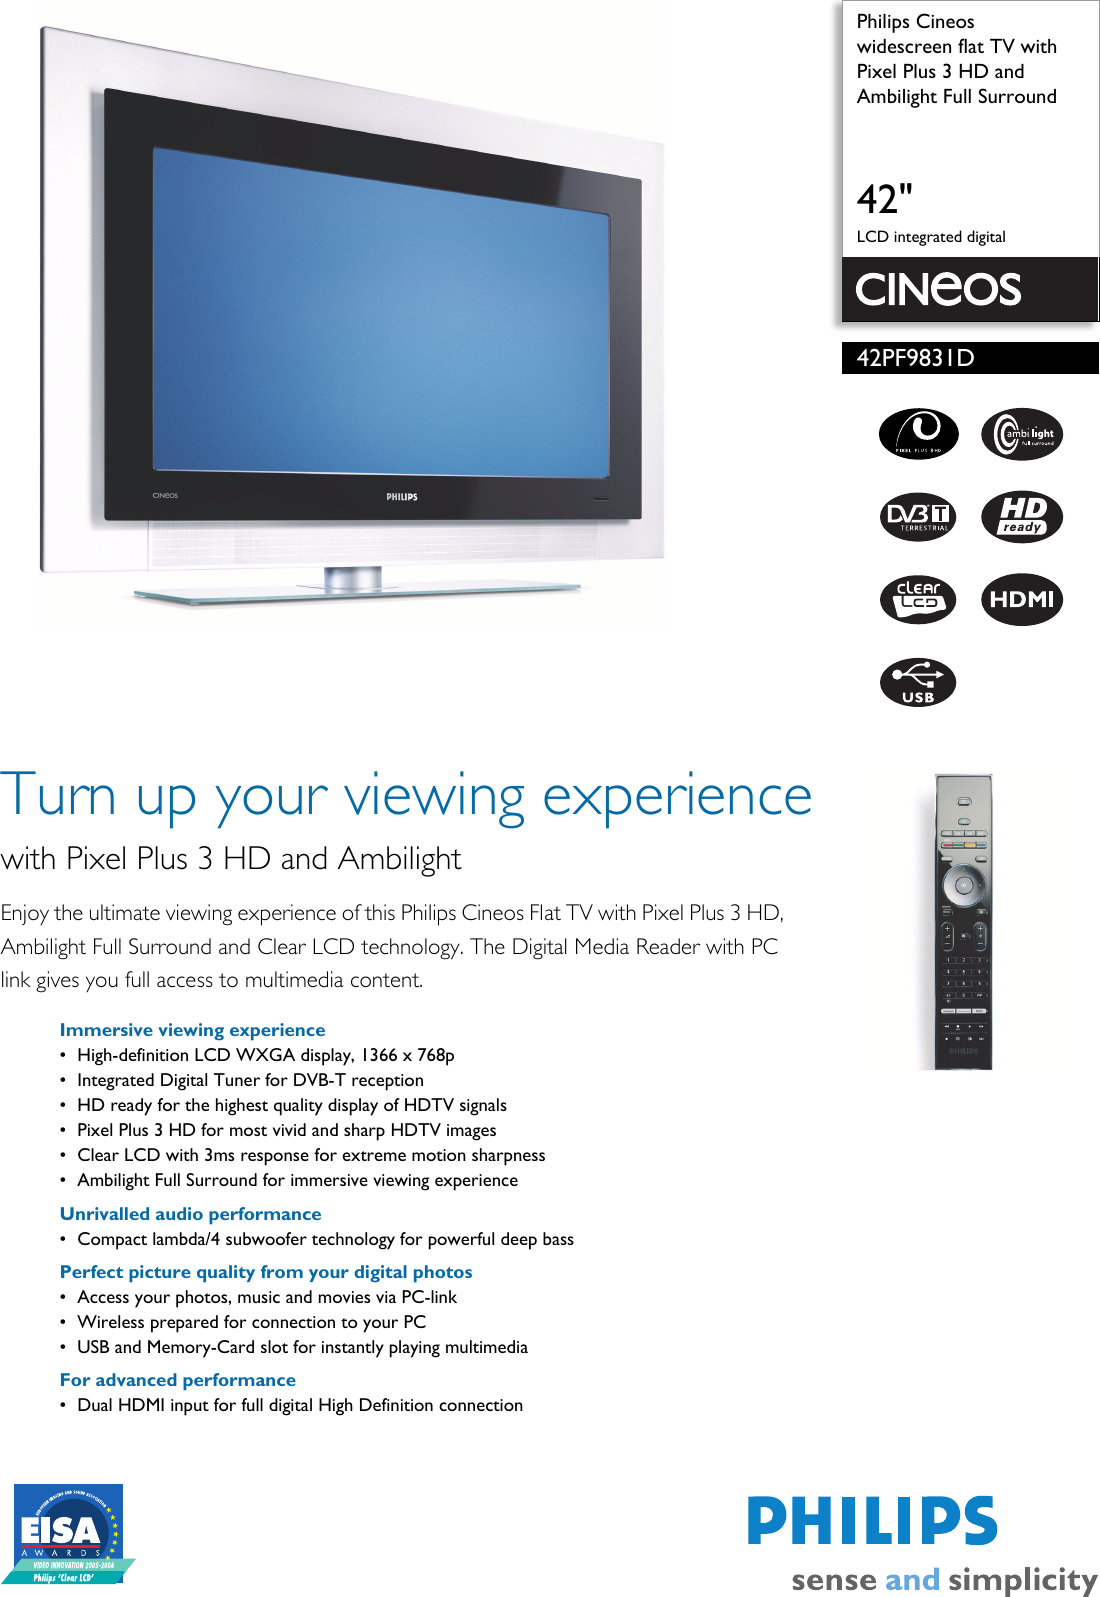 Page 1 of 3 - Philips Philips-Cineos-42Pf9831D-Users-Manual- 42PF9831D/10 Widescreen Flat TV With Pixel Plus 3 HD And Ambilight Full Surround  Philips-cineos-42pf9831d-users-manual